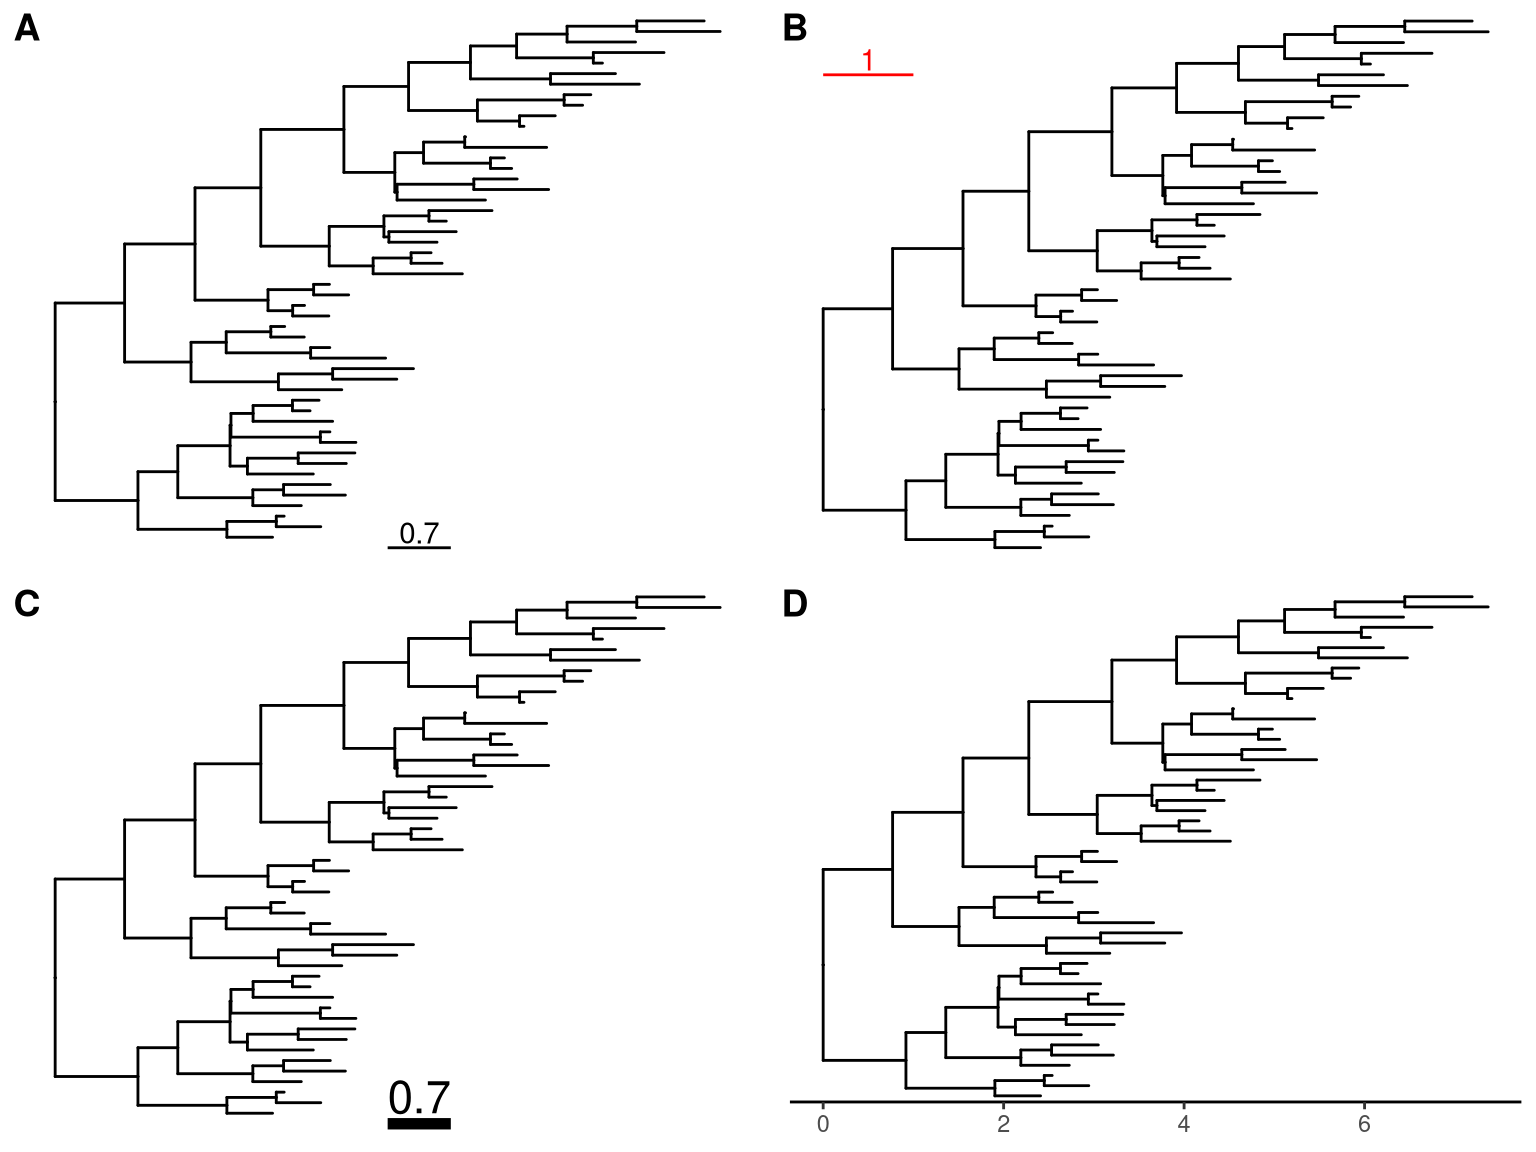 Display tree scale. geom_treescale automatically add a scale bar for evolutionary distance (A). Users can modify color, width and position of the scale (B) as well as size of the scale bar and text and their relative position (C). Another possible solution is to enable x-axis which is useful for time-scale tree (D).